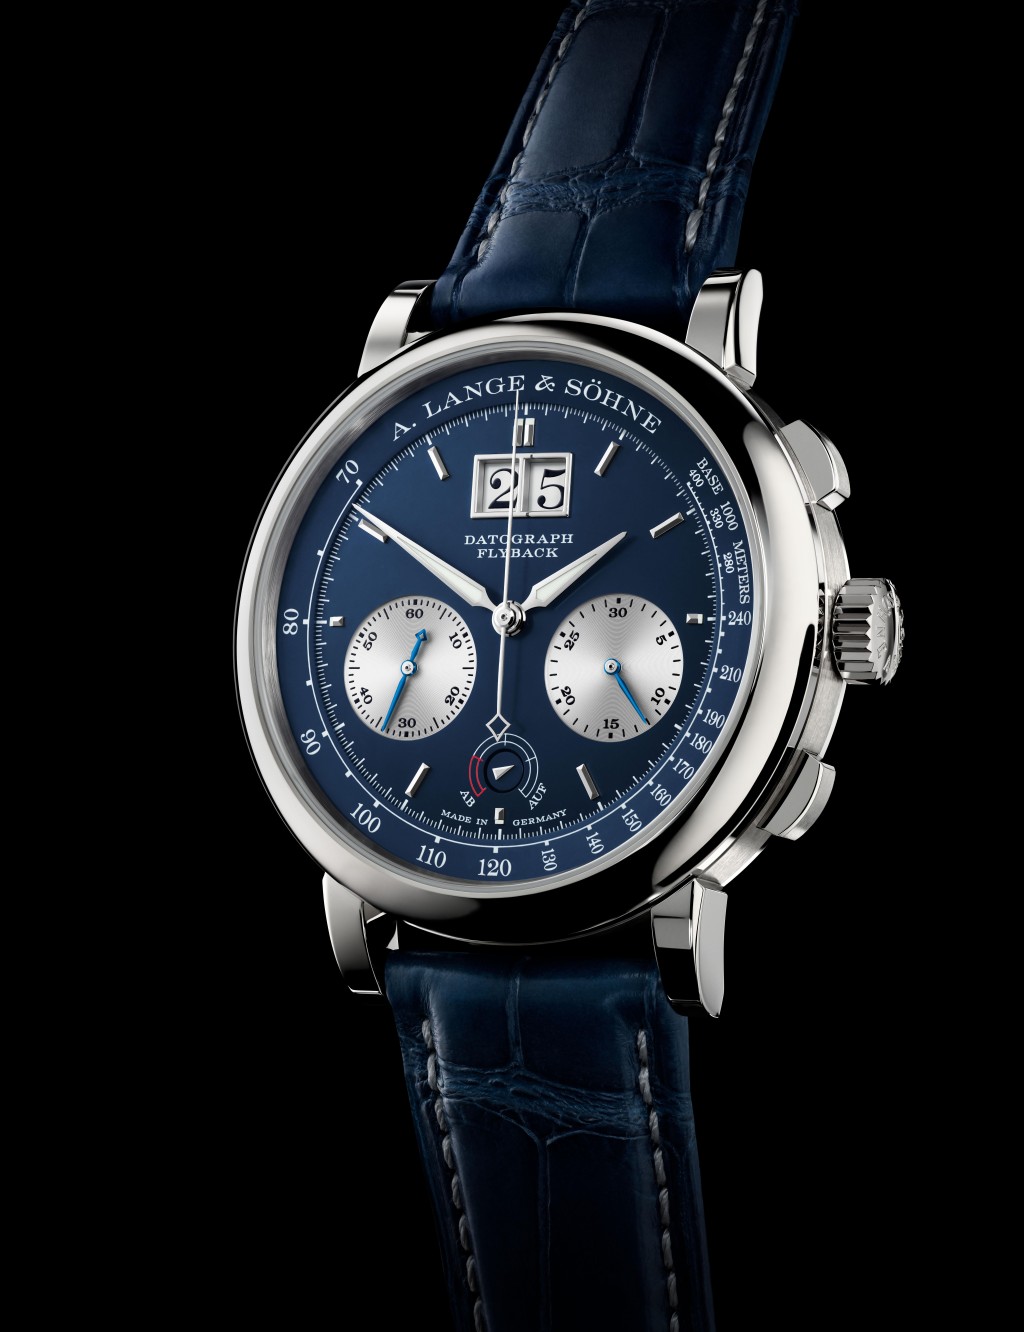 A. Lange & Söhne Datograph Up/Down限量版腕錶。